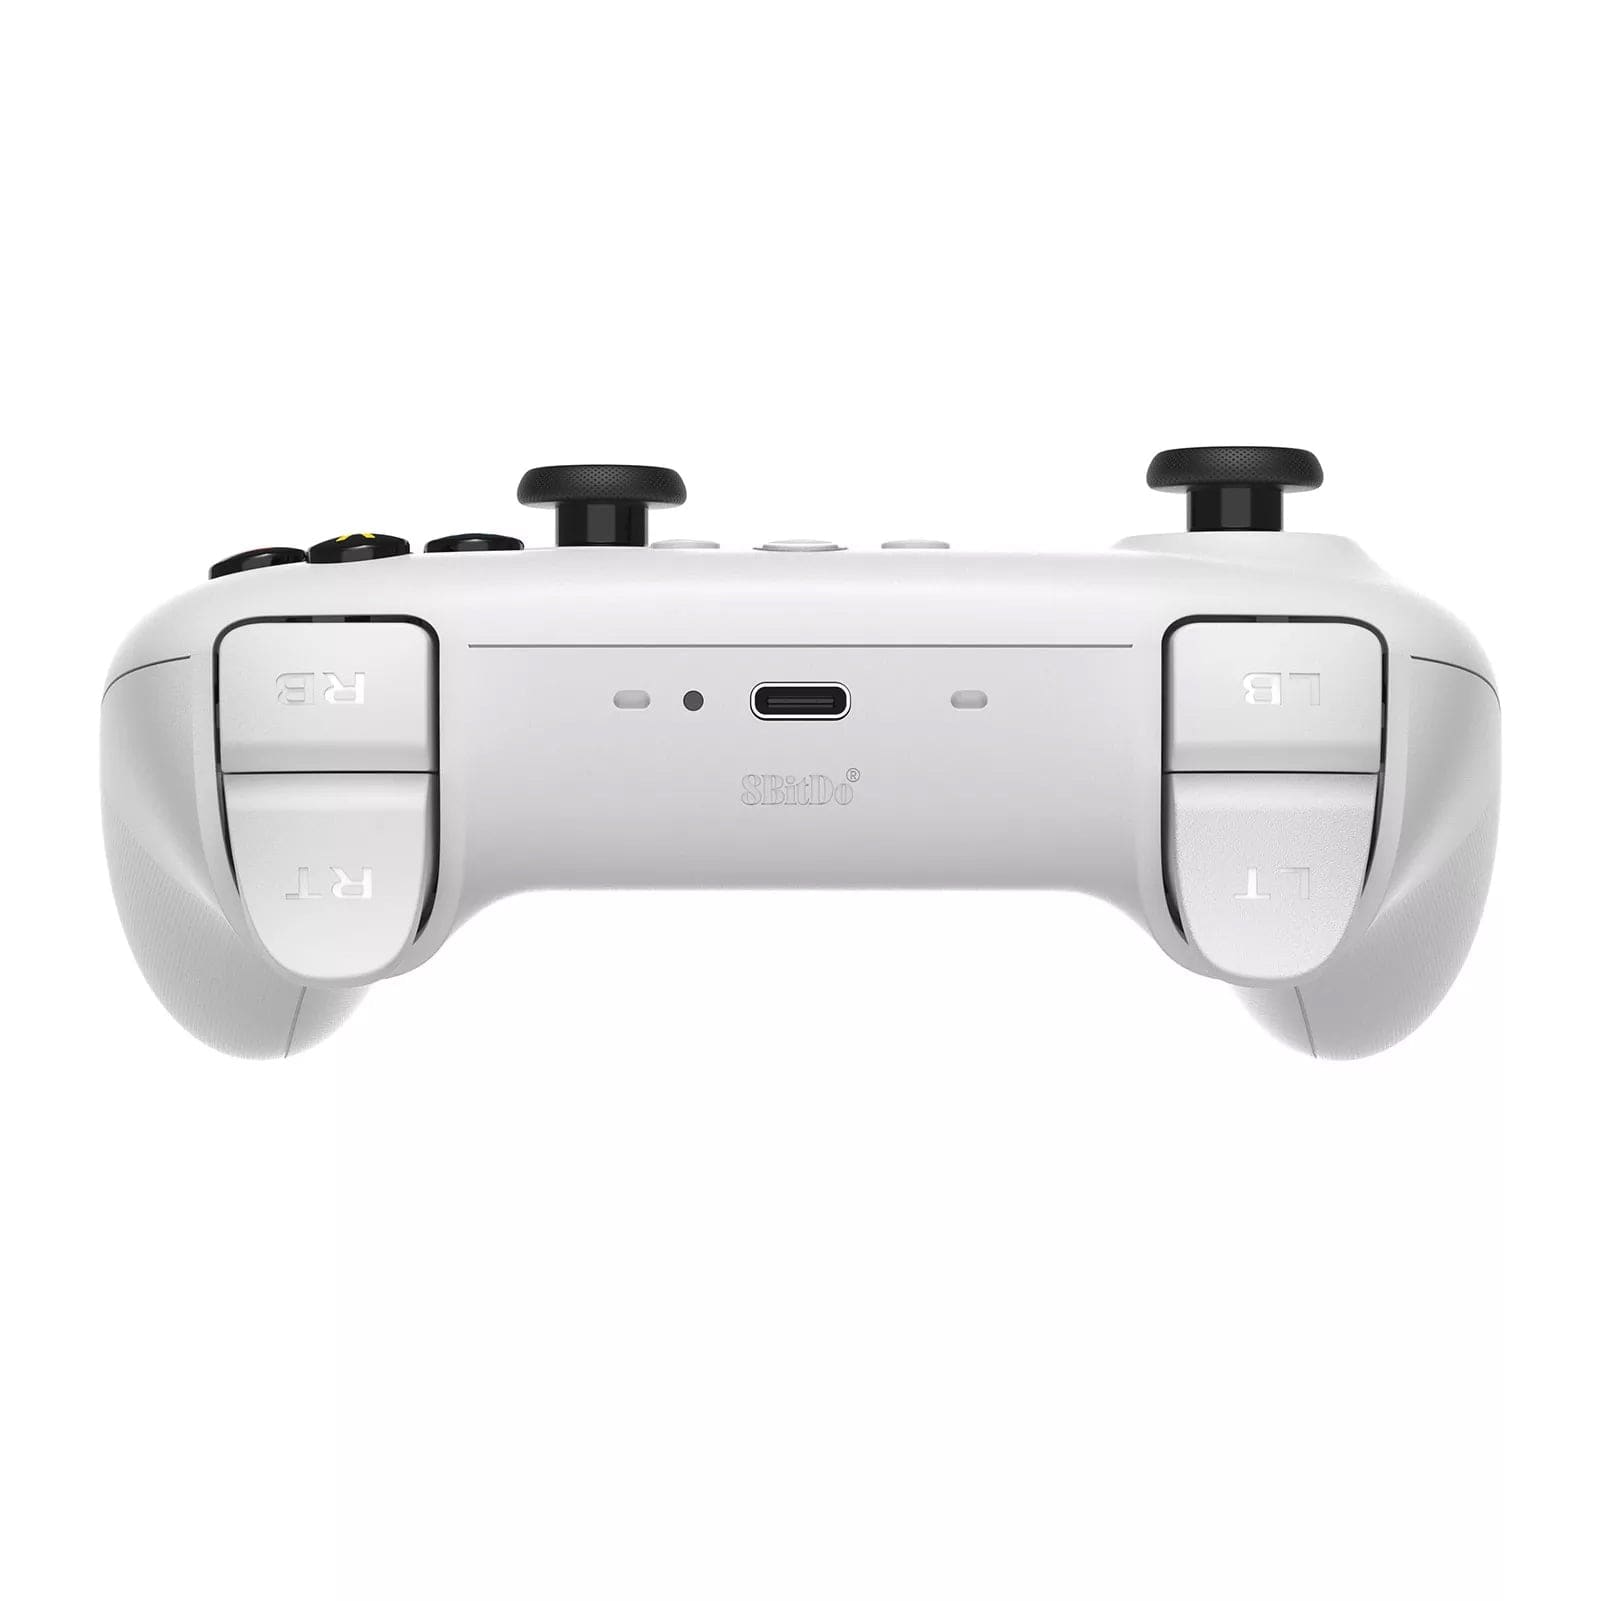 8BitDo Ultimate 2.4G Controller with Charging Dock - White - The Pi Hut